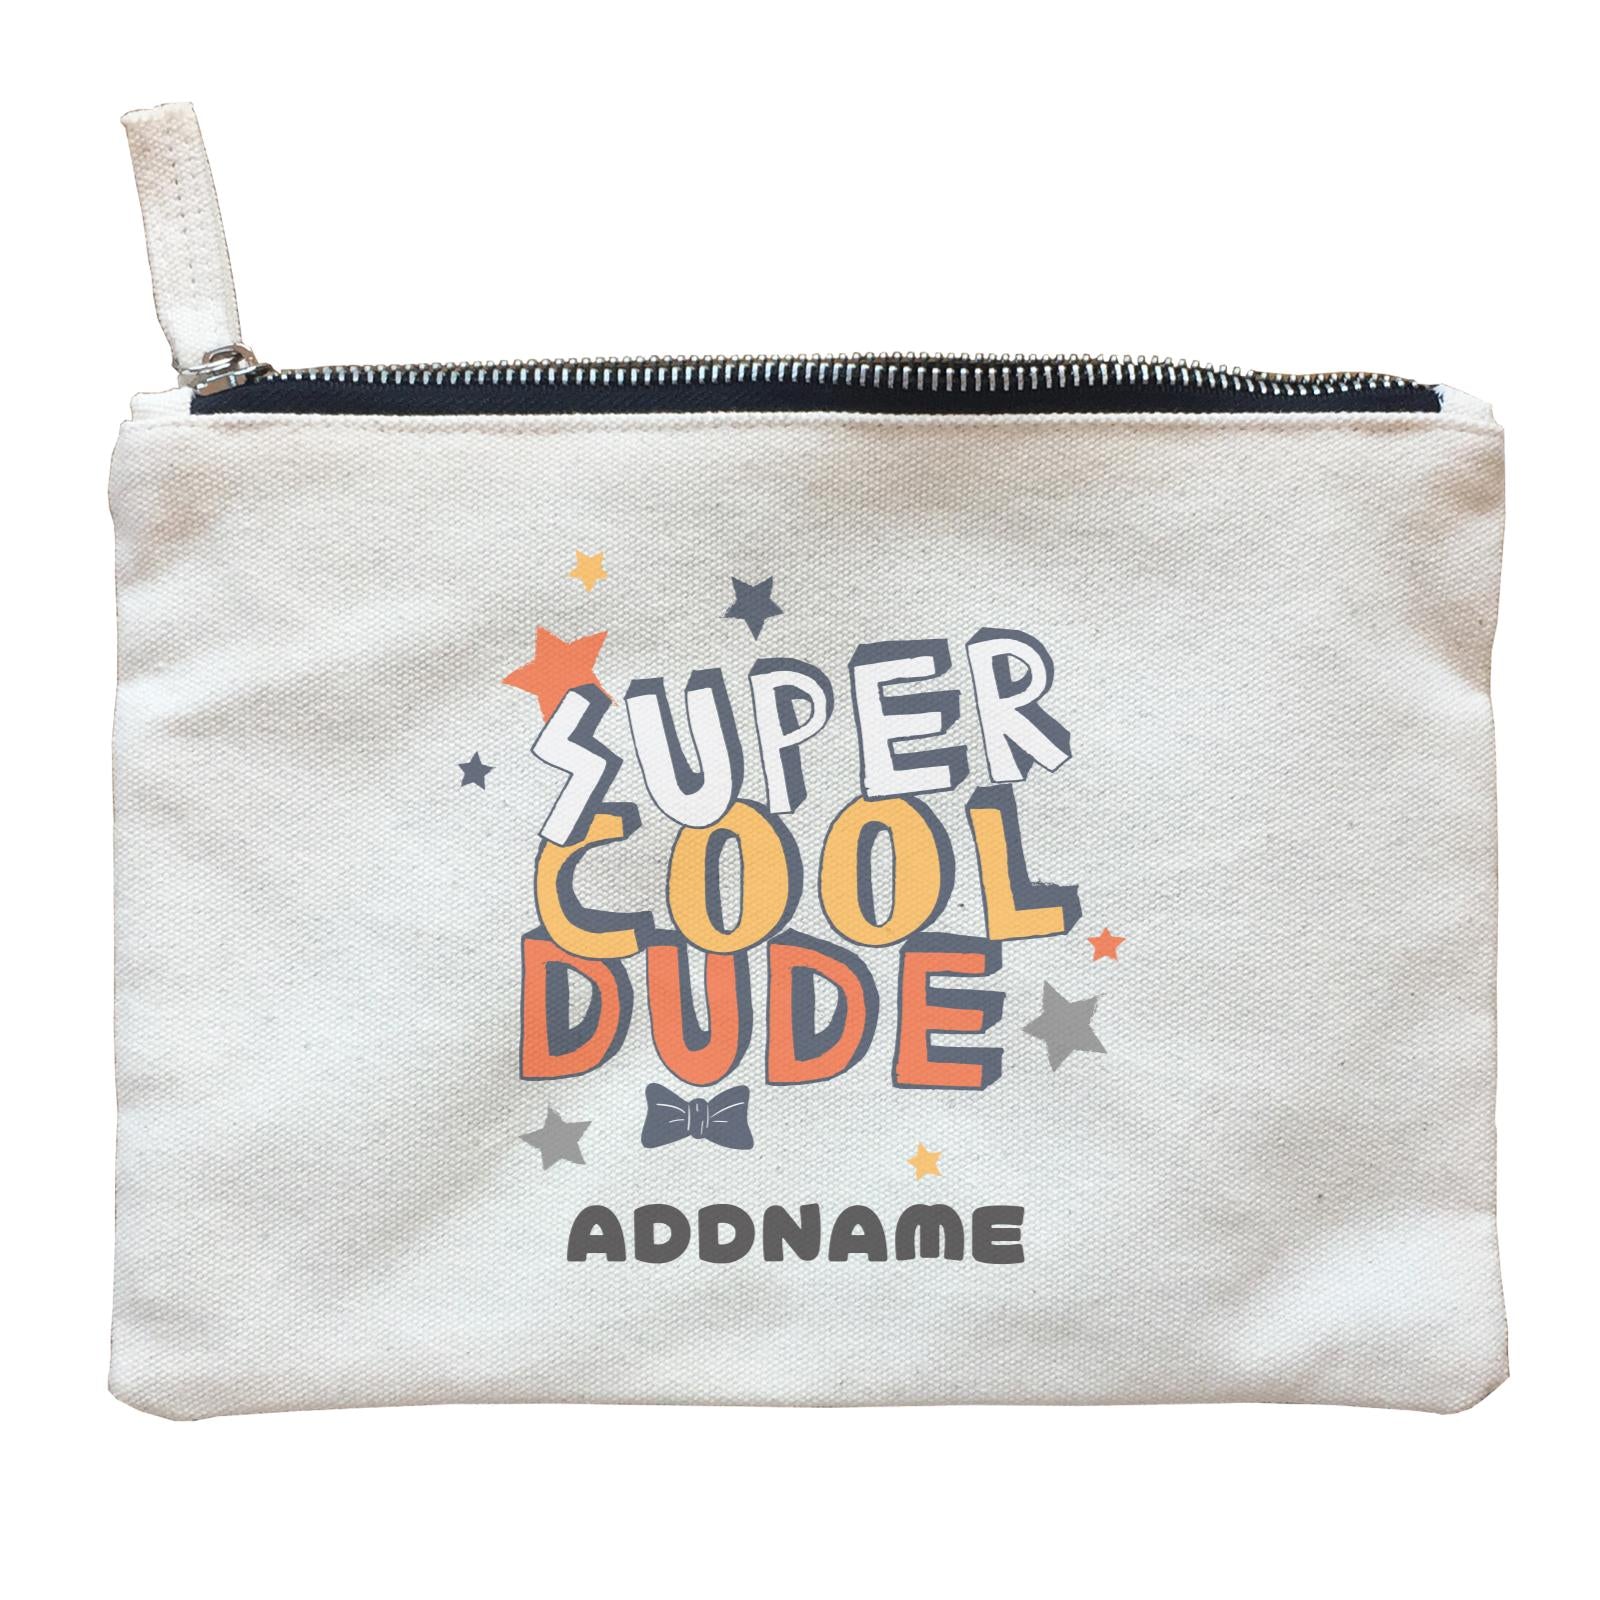 Super Cool Dude with Bow Tie Addname Zipper Pouch